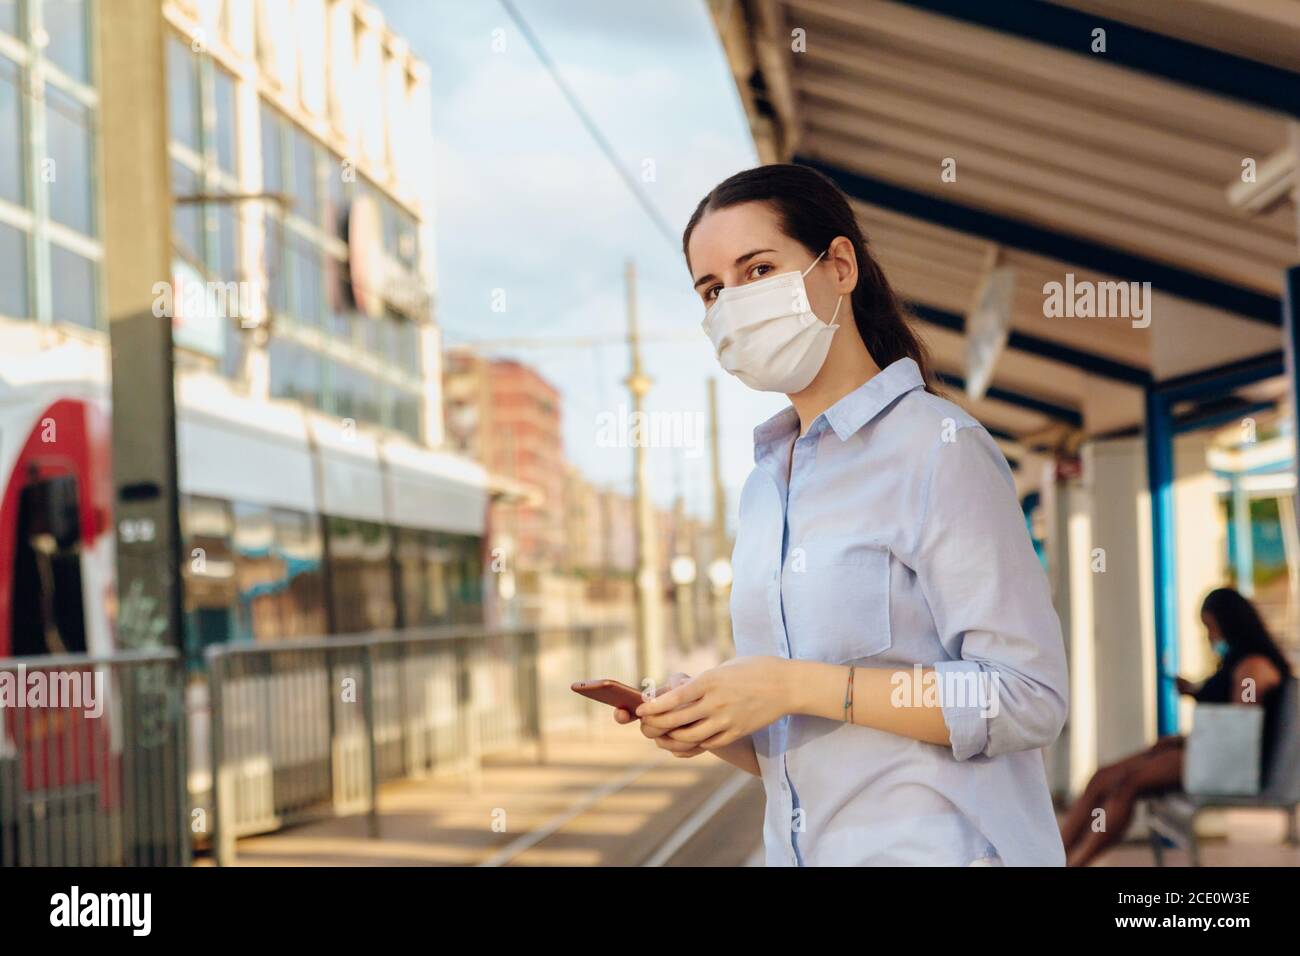 Stock photo of a woman wearing a face mask, holding a phone and waiting for the tram to arrive at the station. New normal concept Stock Photo